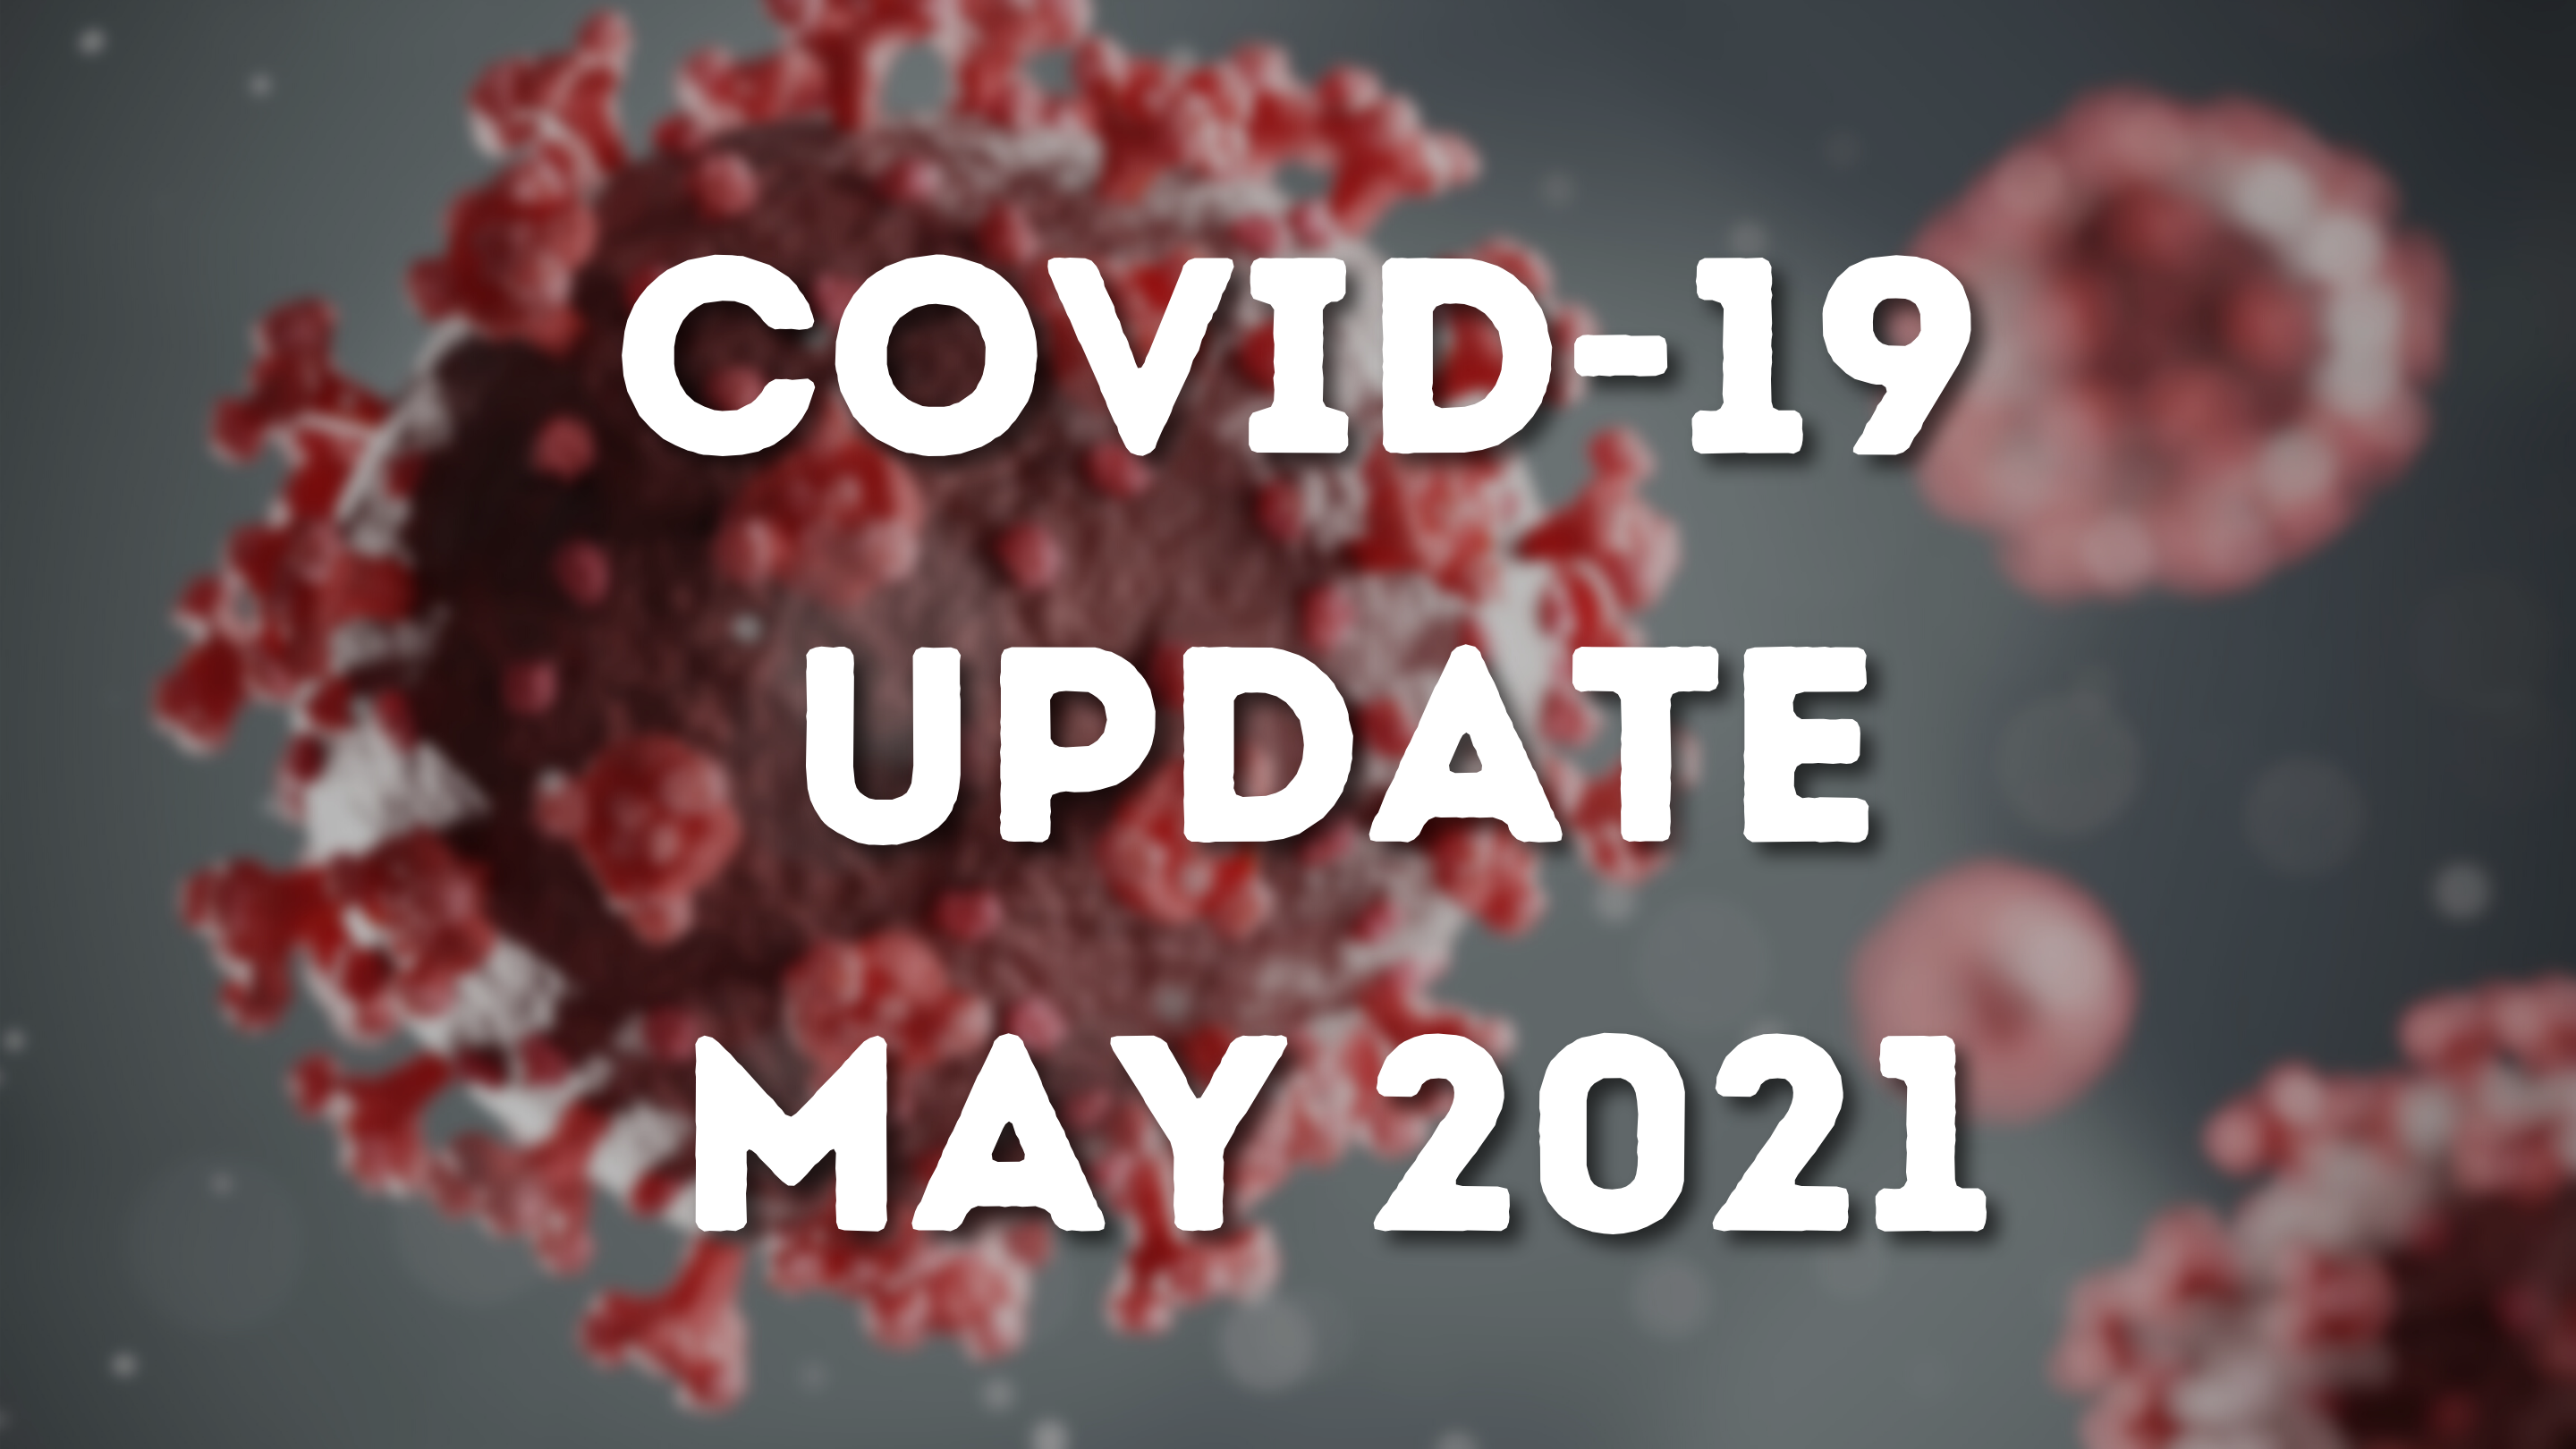 COVID Update for the start of May 2021